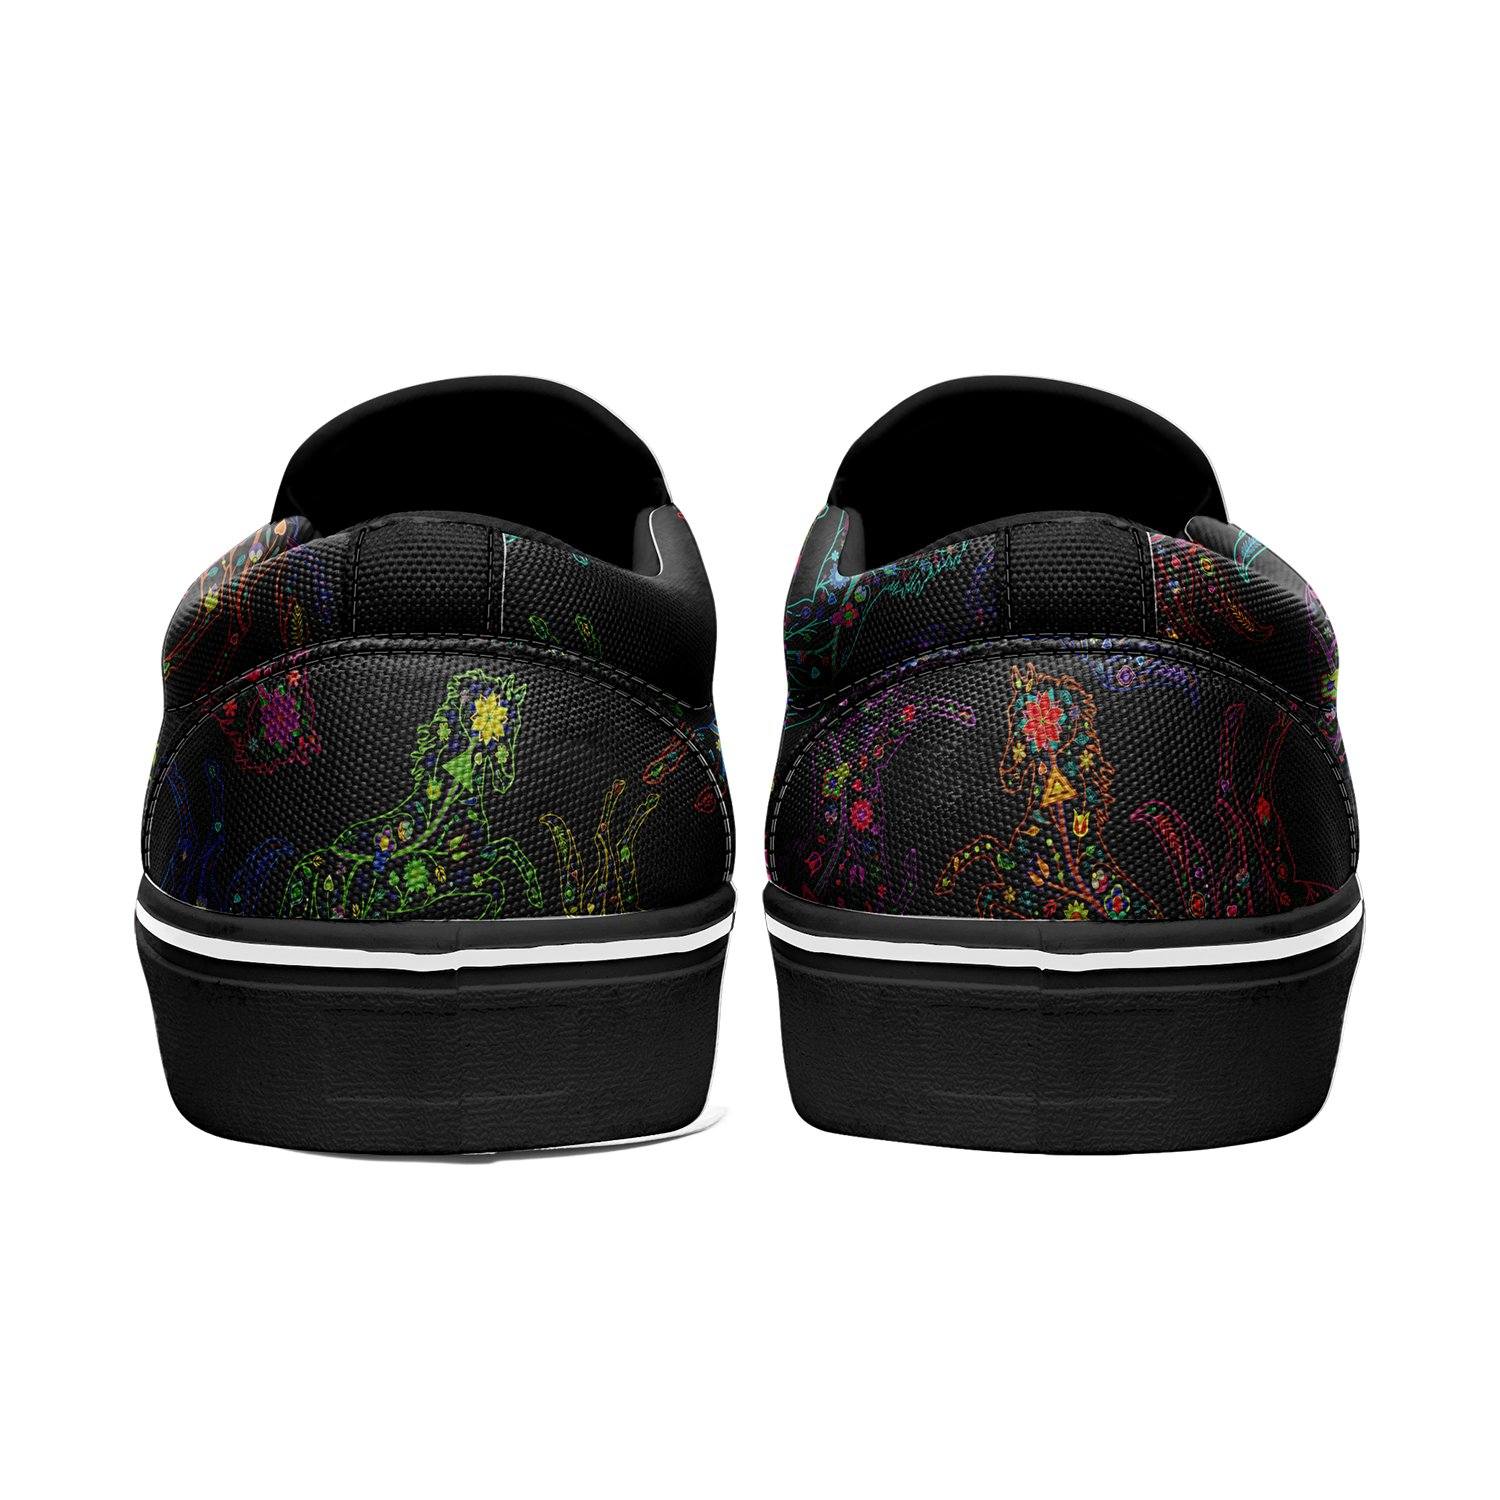 Floral Horse Otoyimm Canvas Slip On Shoes otoyimm Herman 